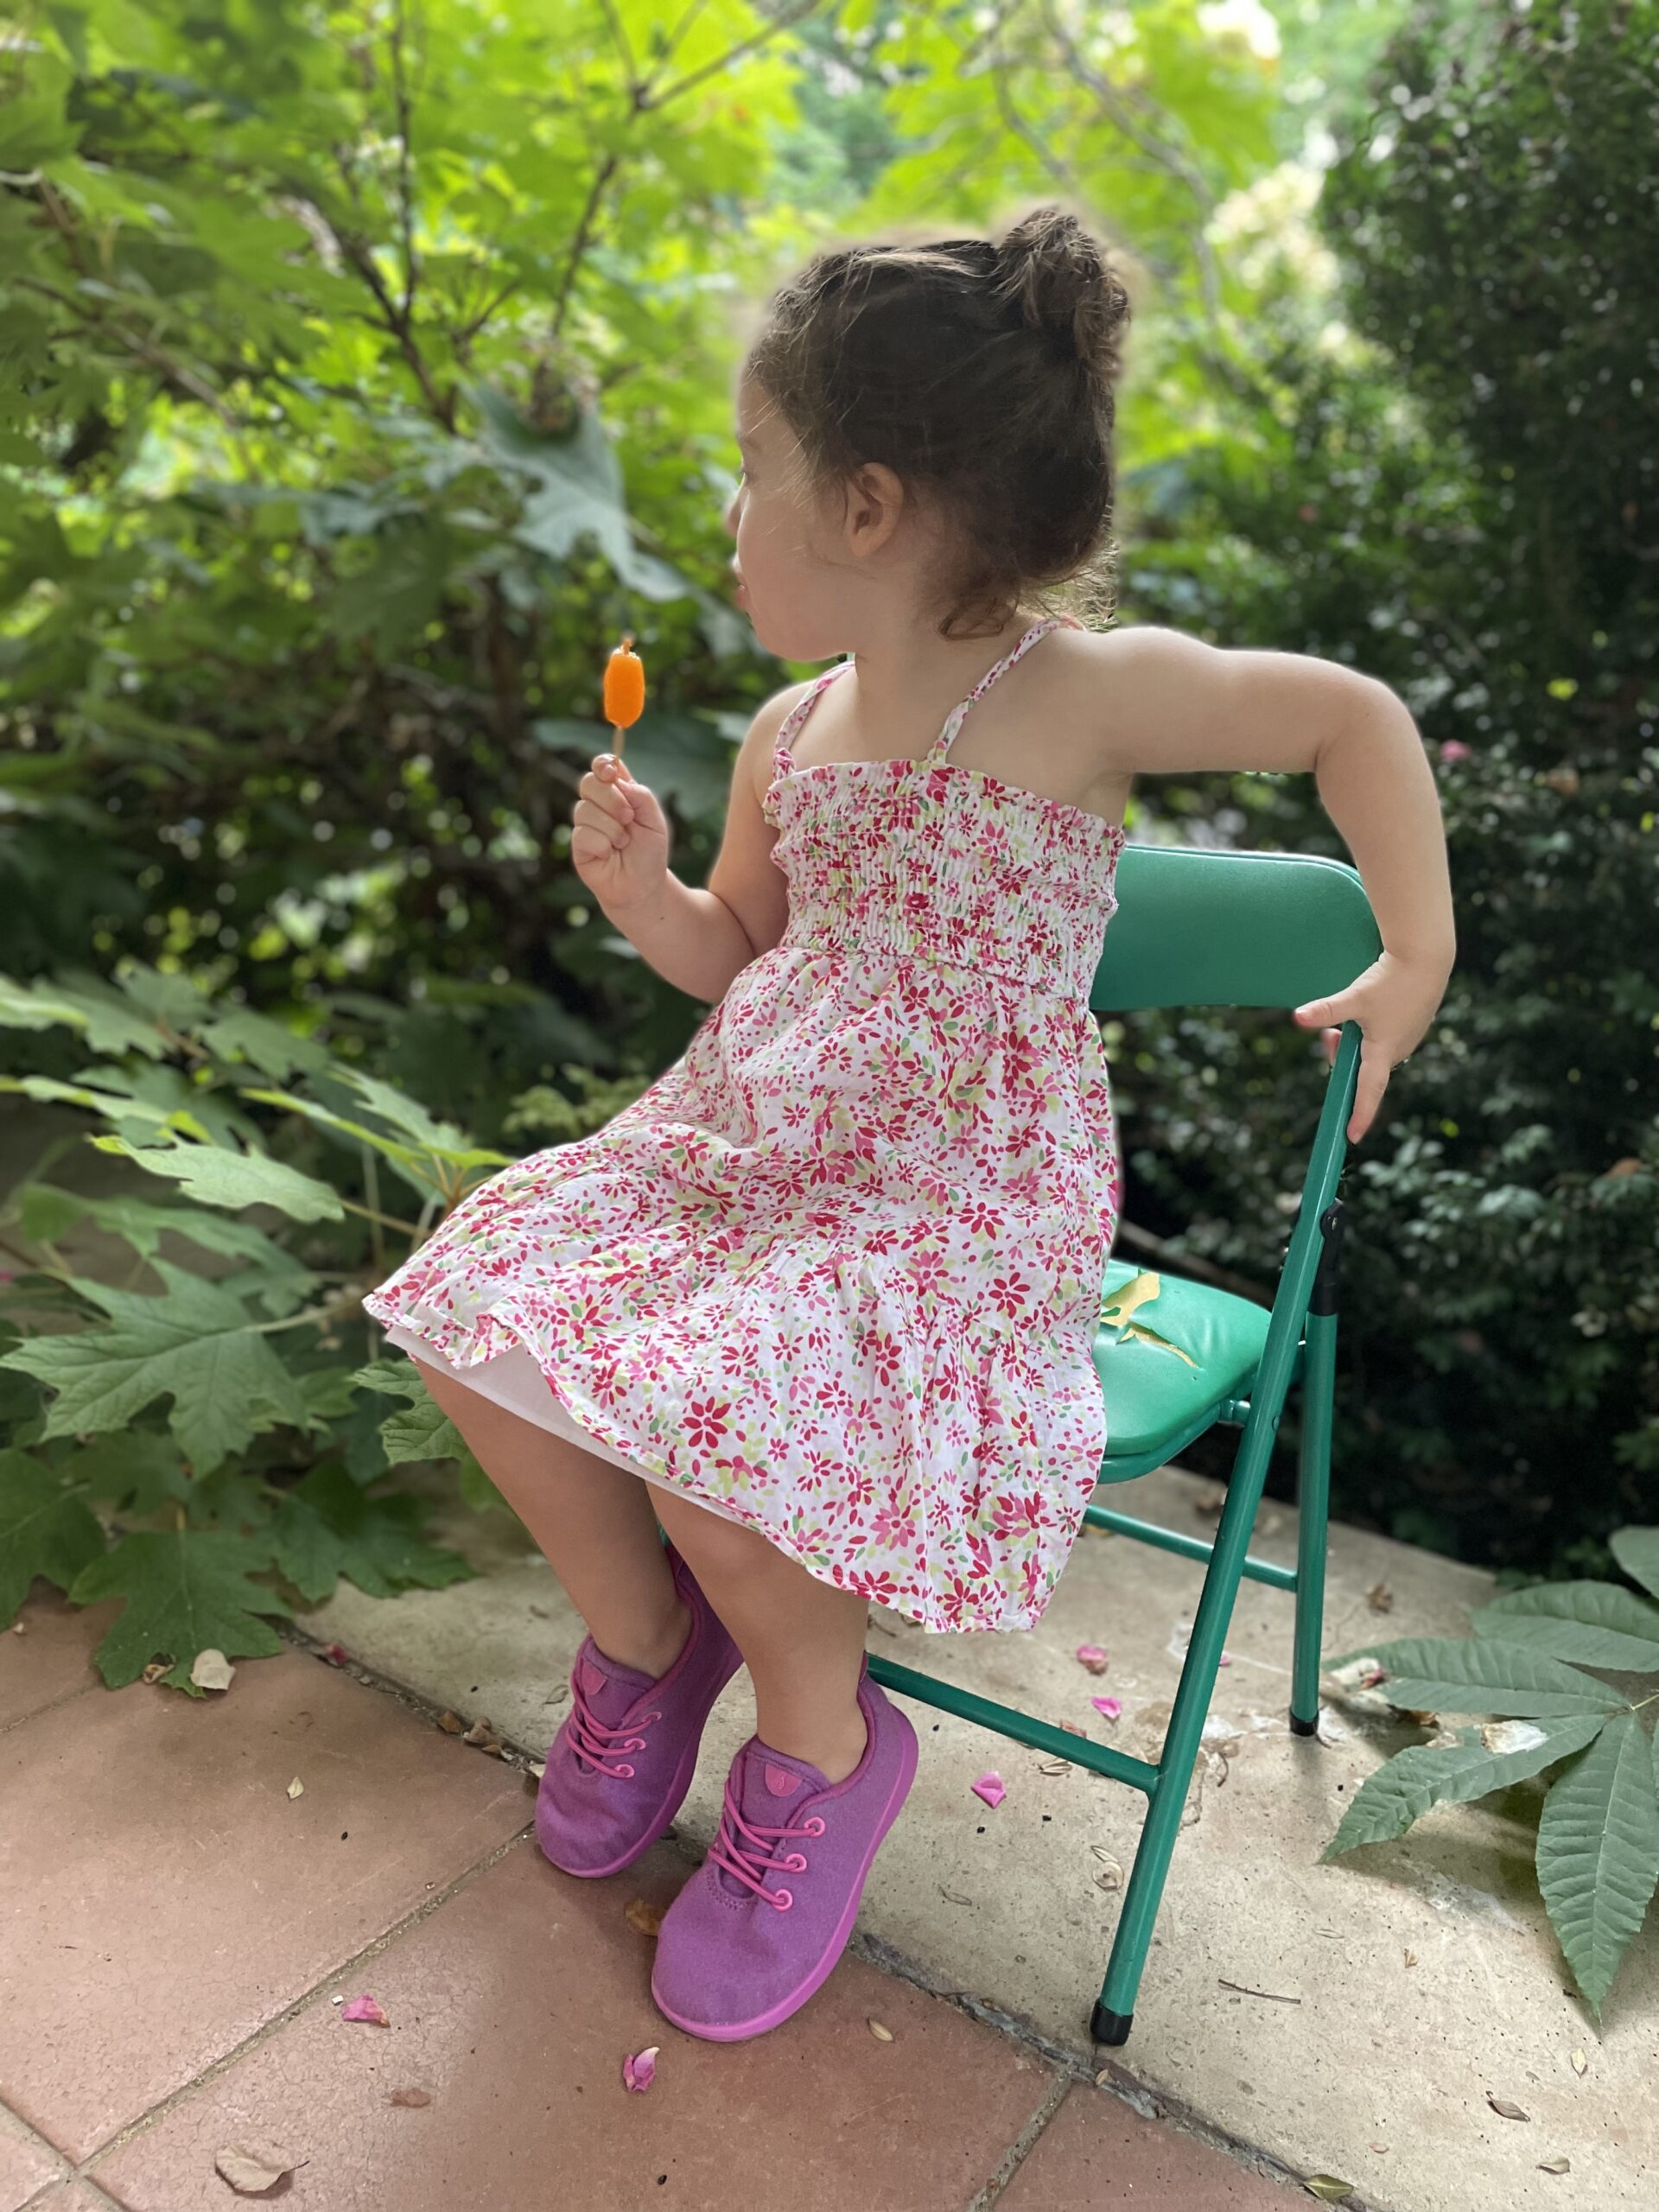 A little girl in a dress sits outside on a green chair wearing pink Allbirds wool runners.